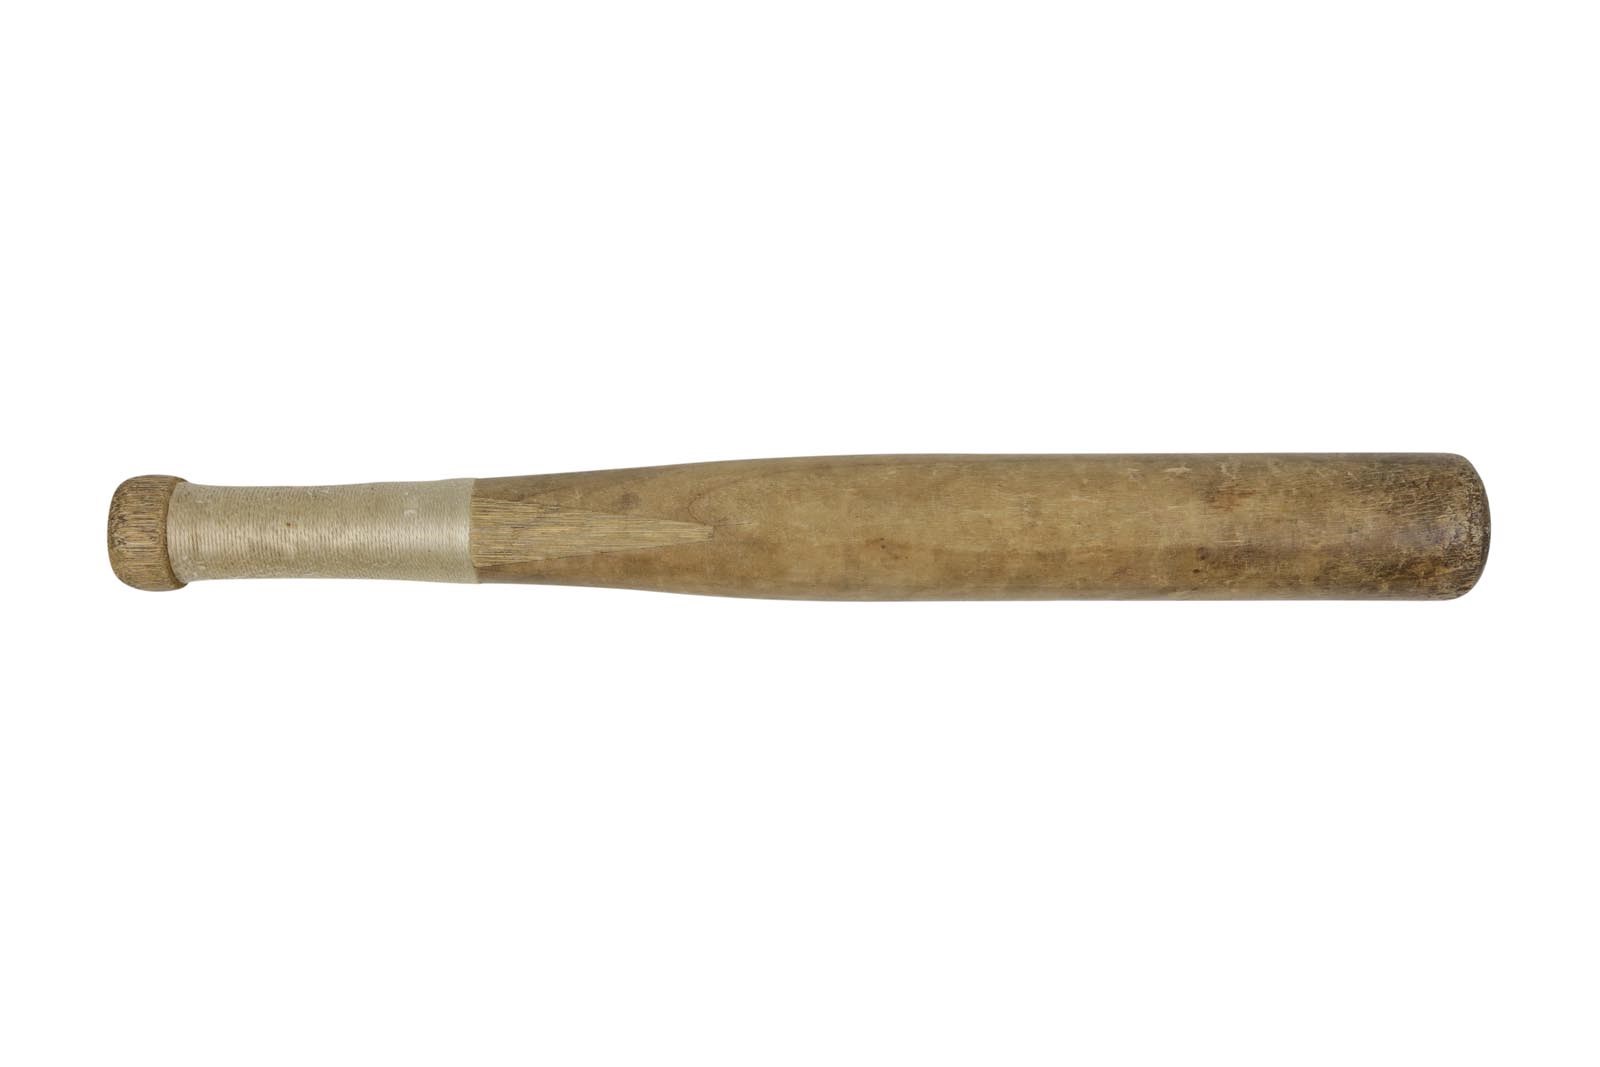 Early Baseball - 19th Century Rounders Bat From England